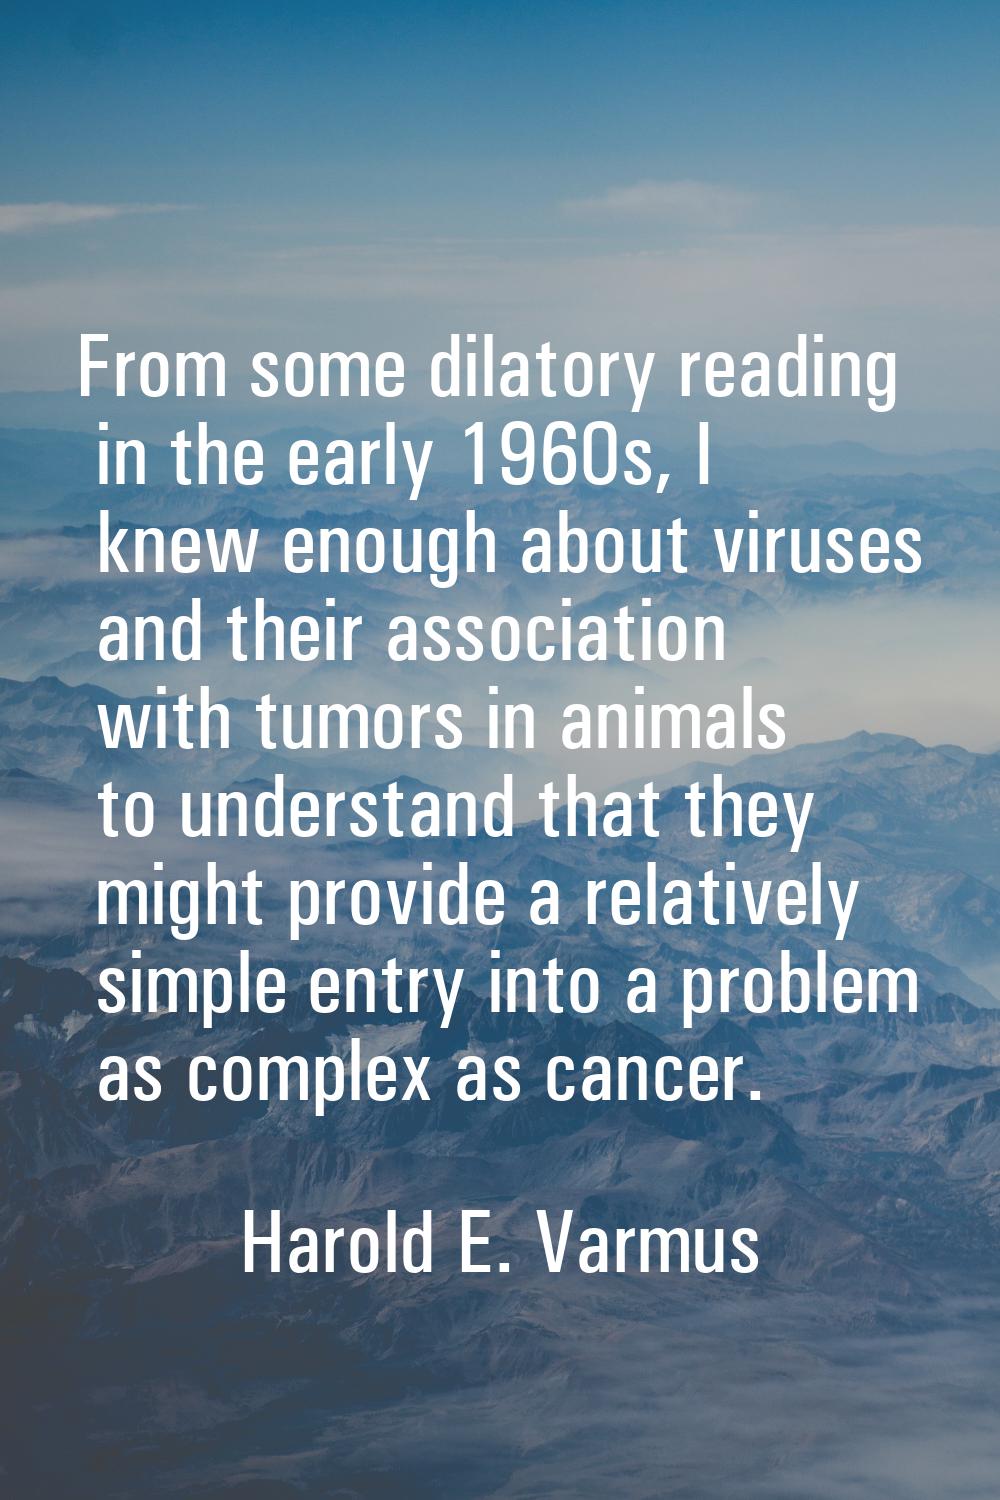 From some dilatory reading in the early 1960s, I knew enough about viruses and their association wi